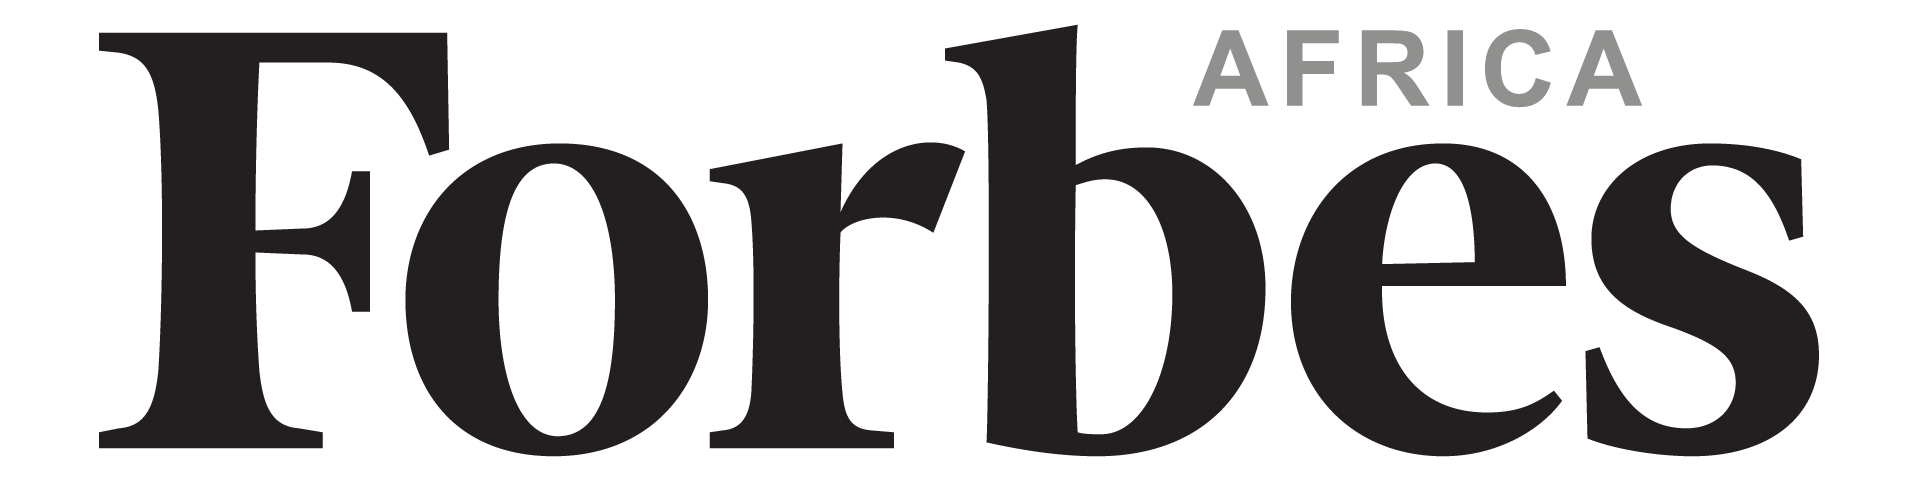 Forbes Africa - Media - Publishers